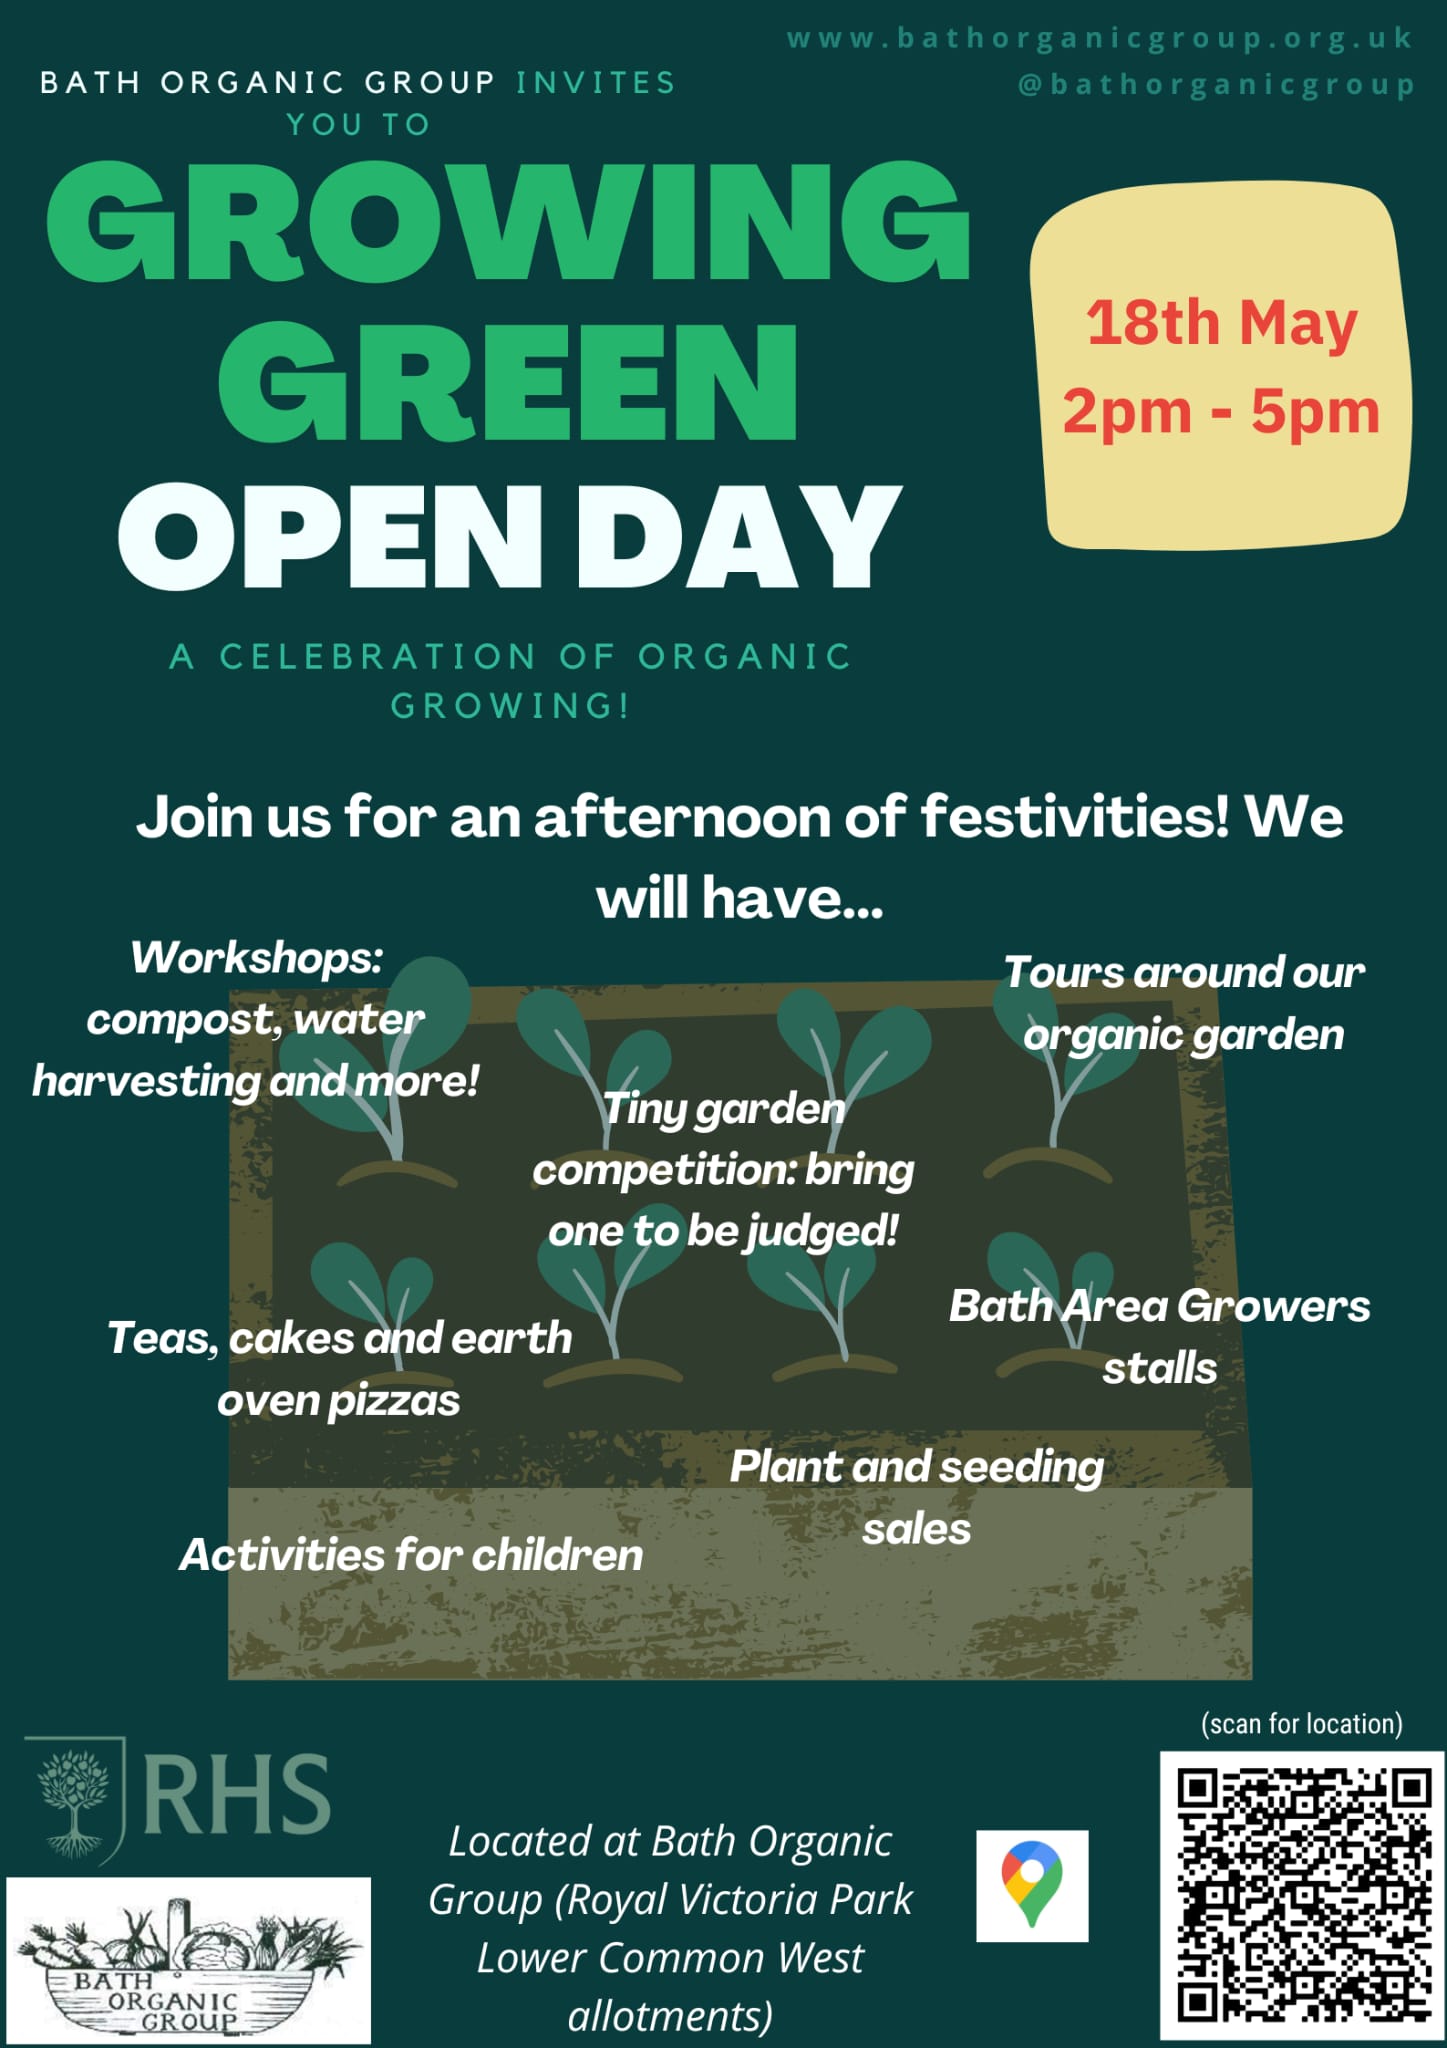 Poster with Growing Green Open Day in large letters, as well as more description.